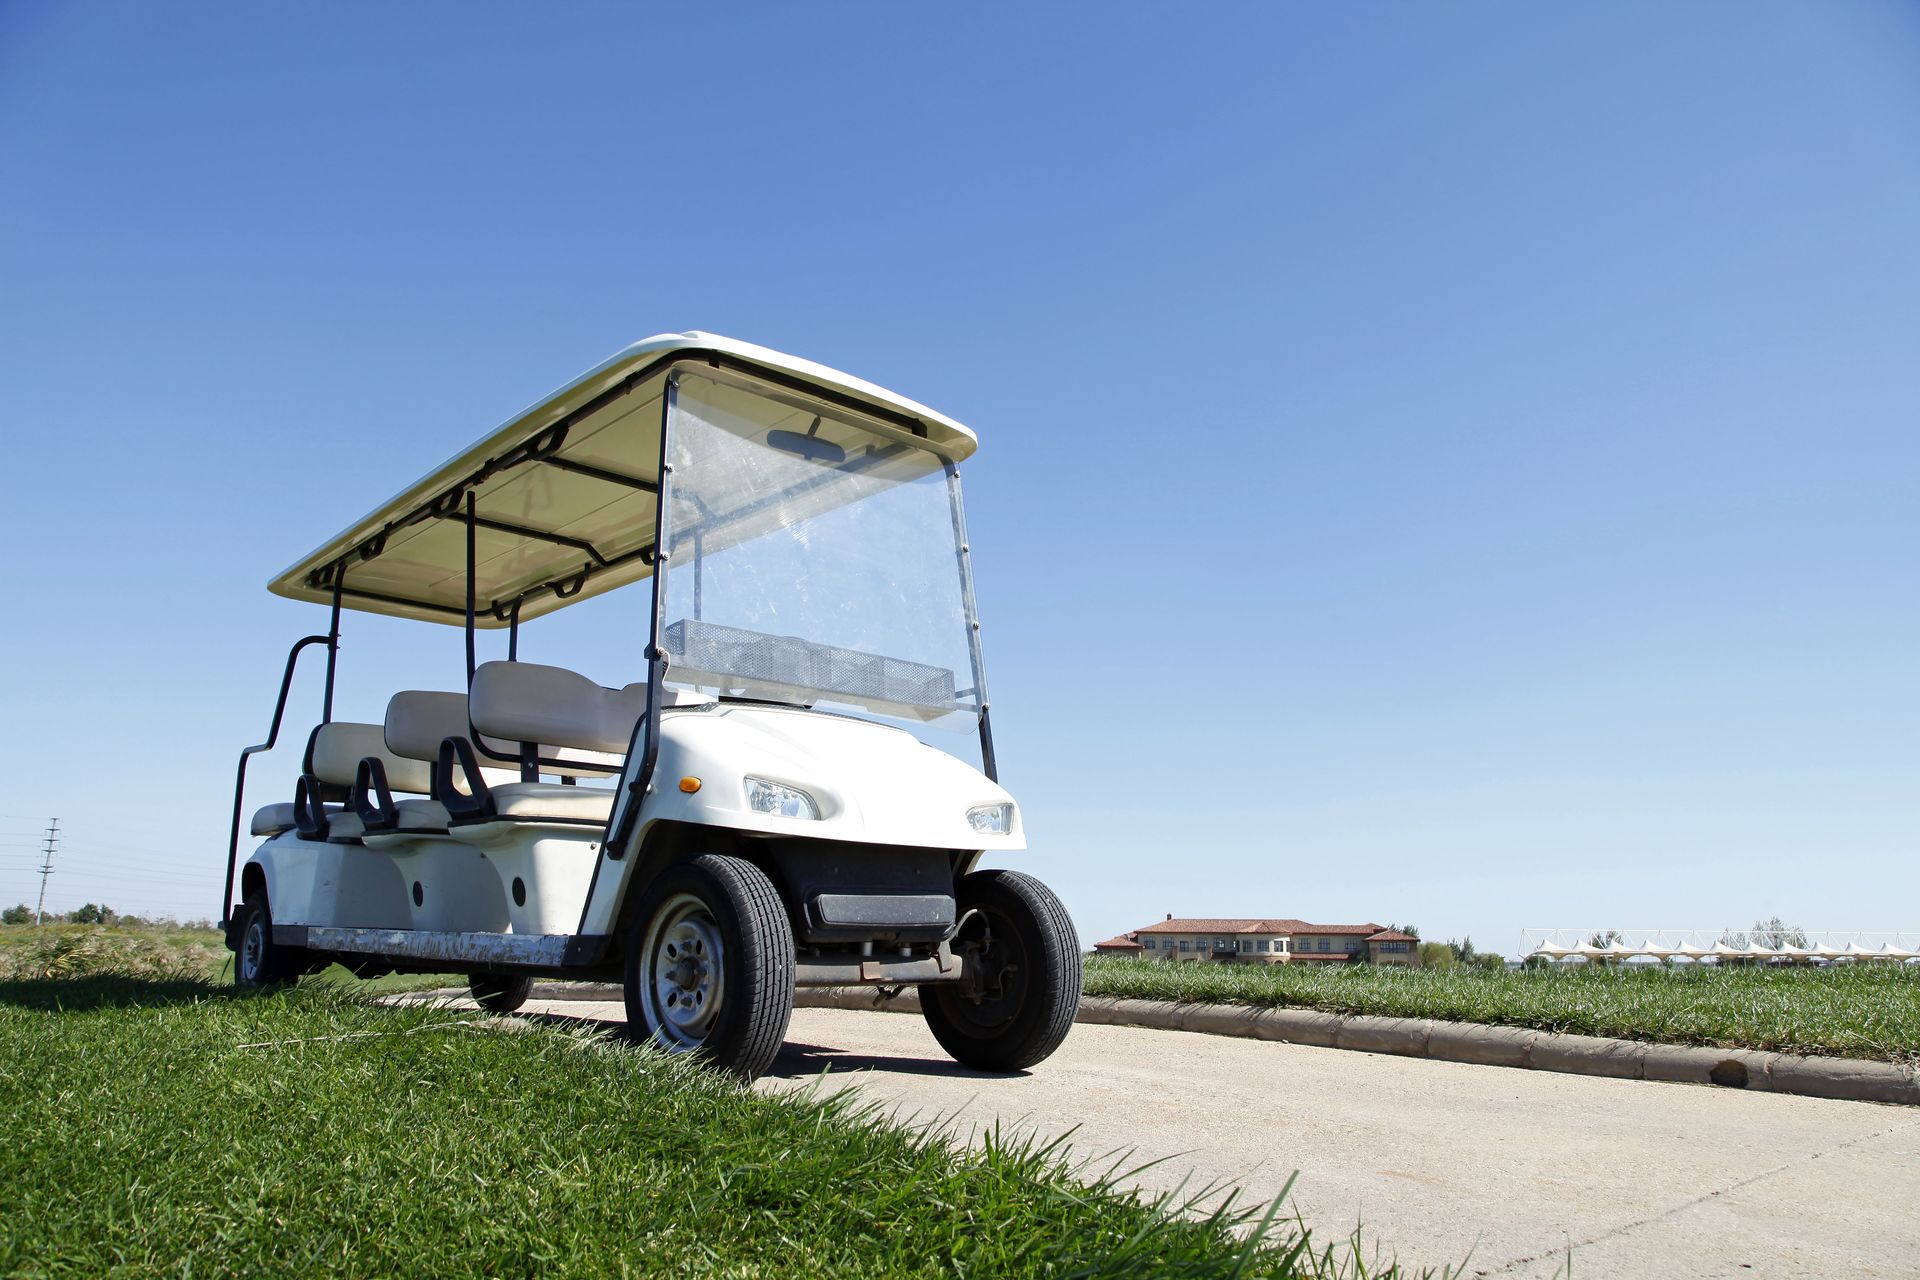 golf carts for sale